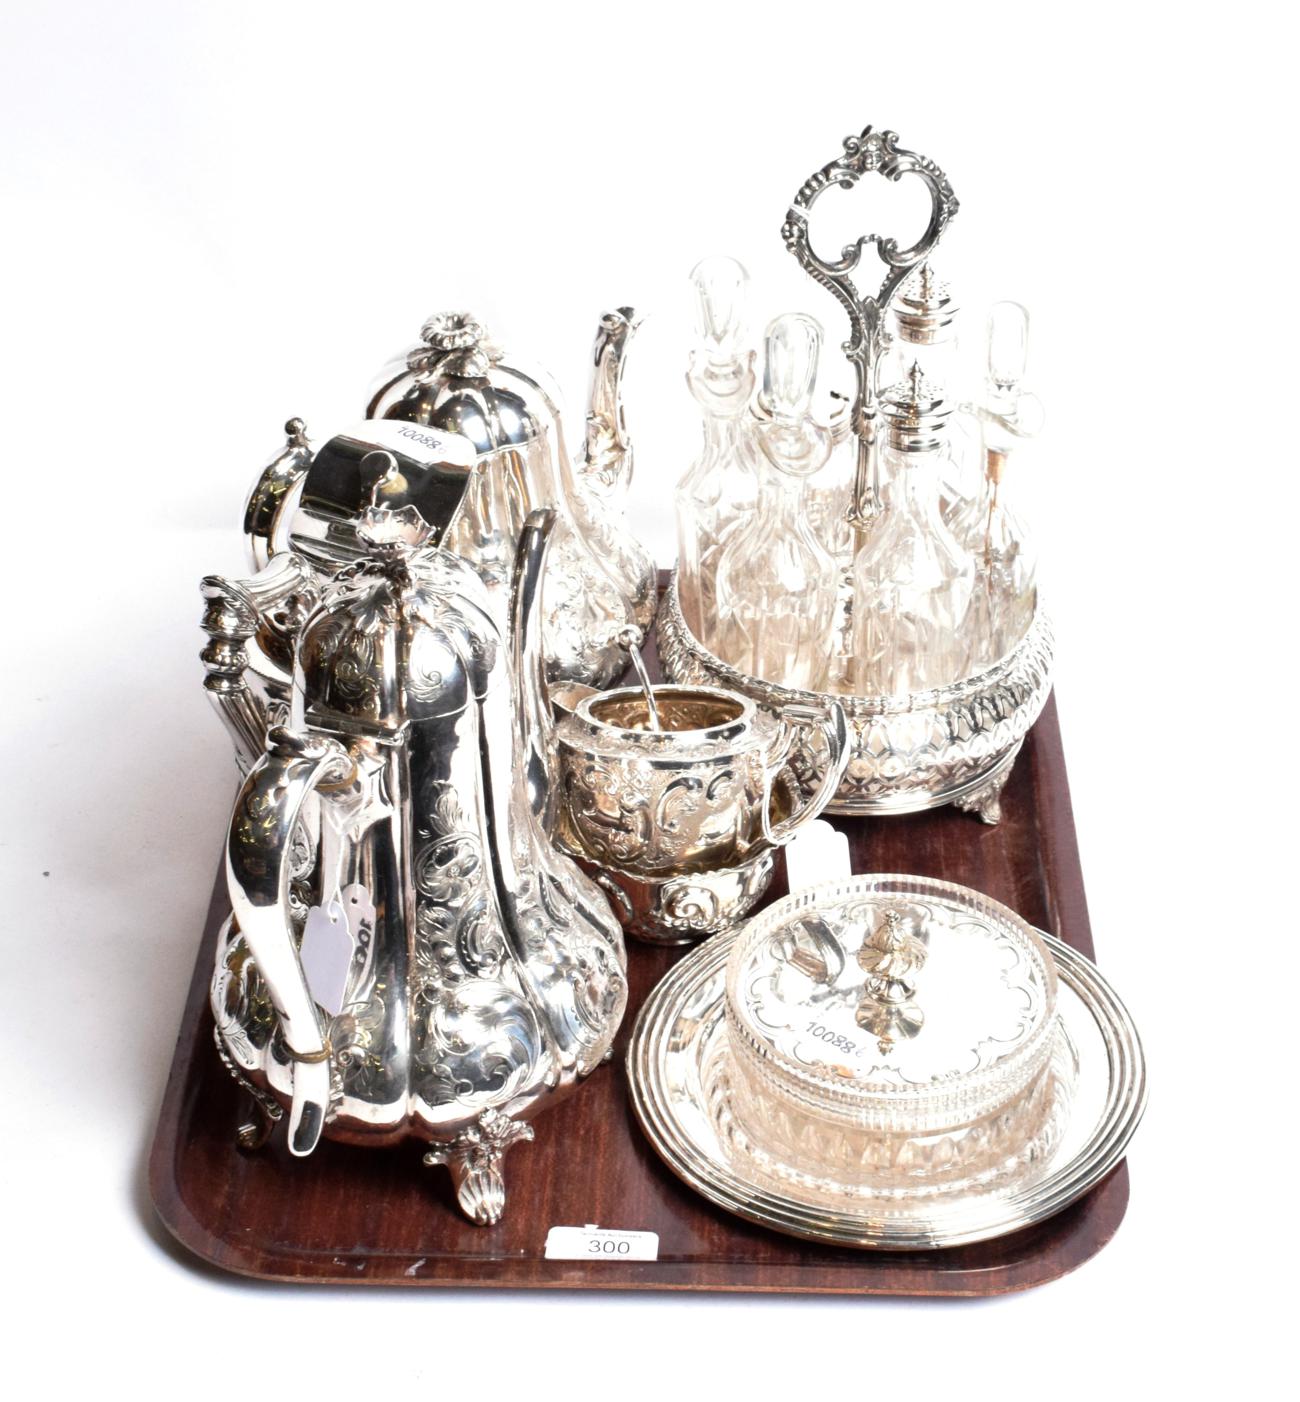 Lot 300 - A collection of silver plate and EPNS wares, 19th/20th century, including a melon fluted coffee pot